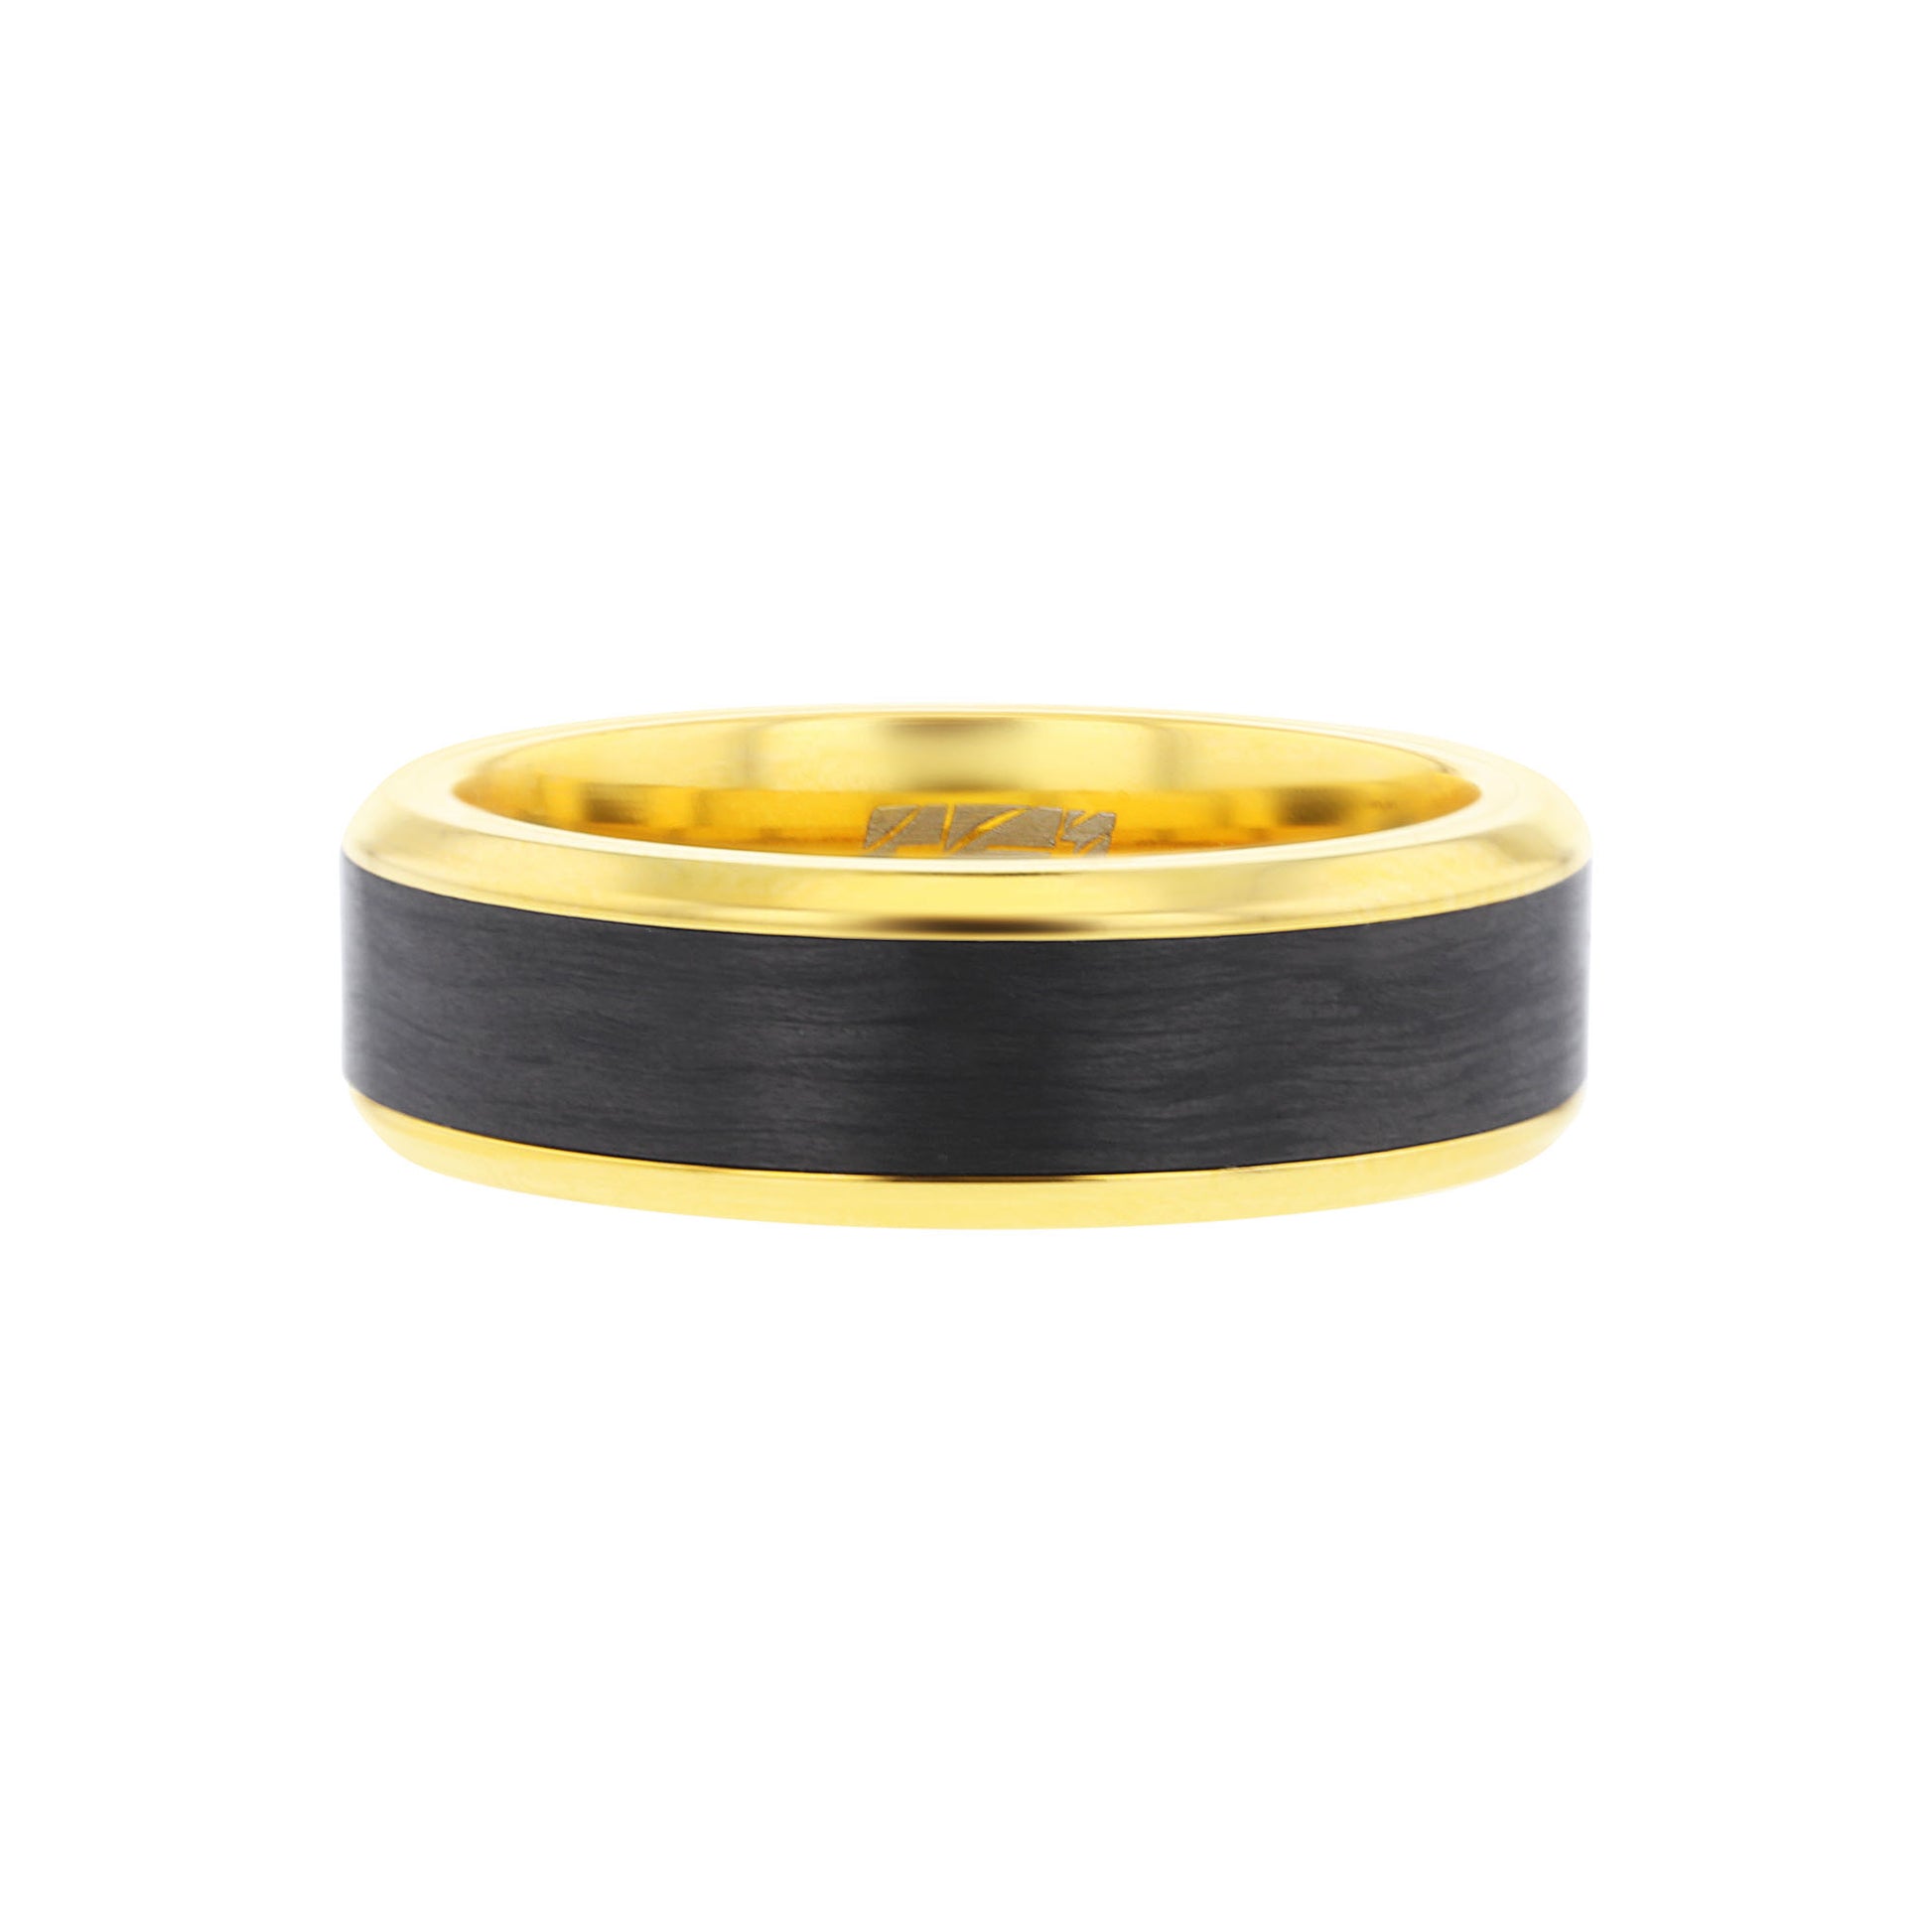 Orson Stainless Steel Wedding Ring